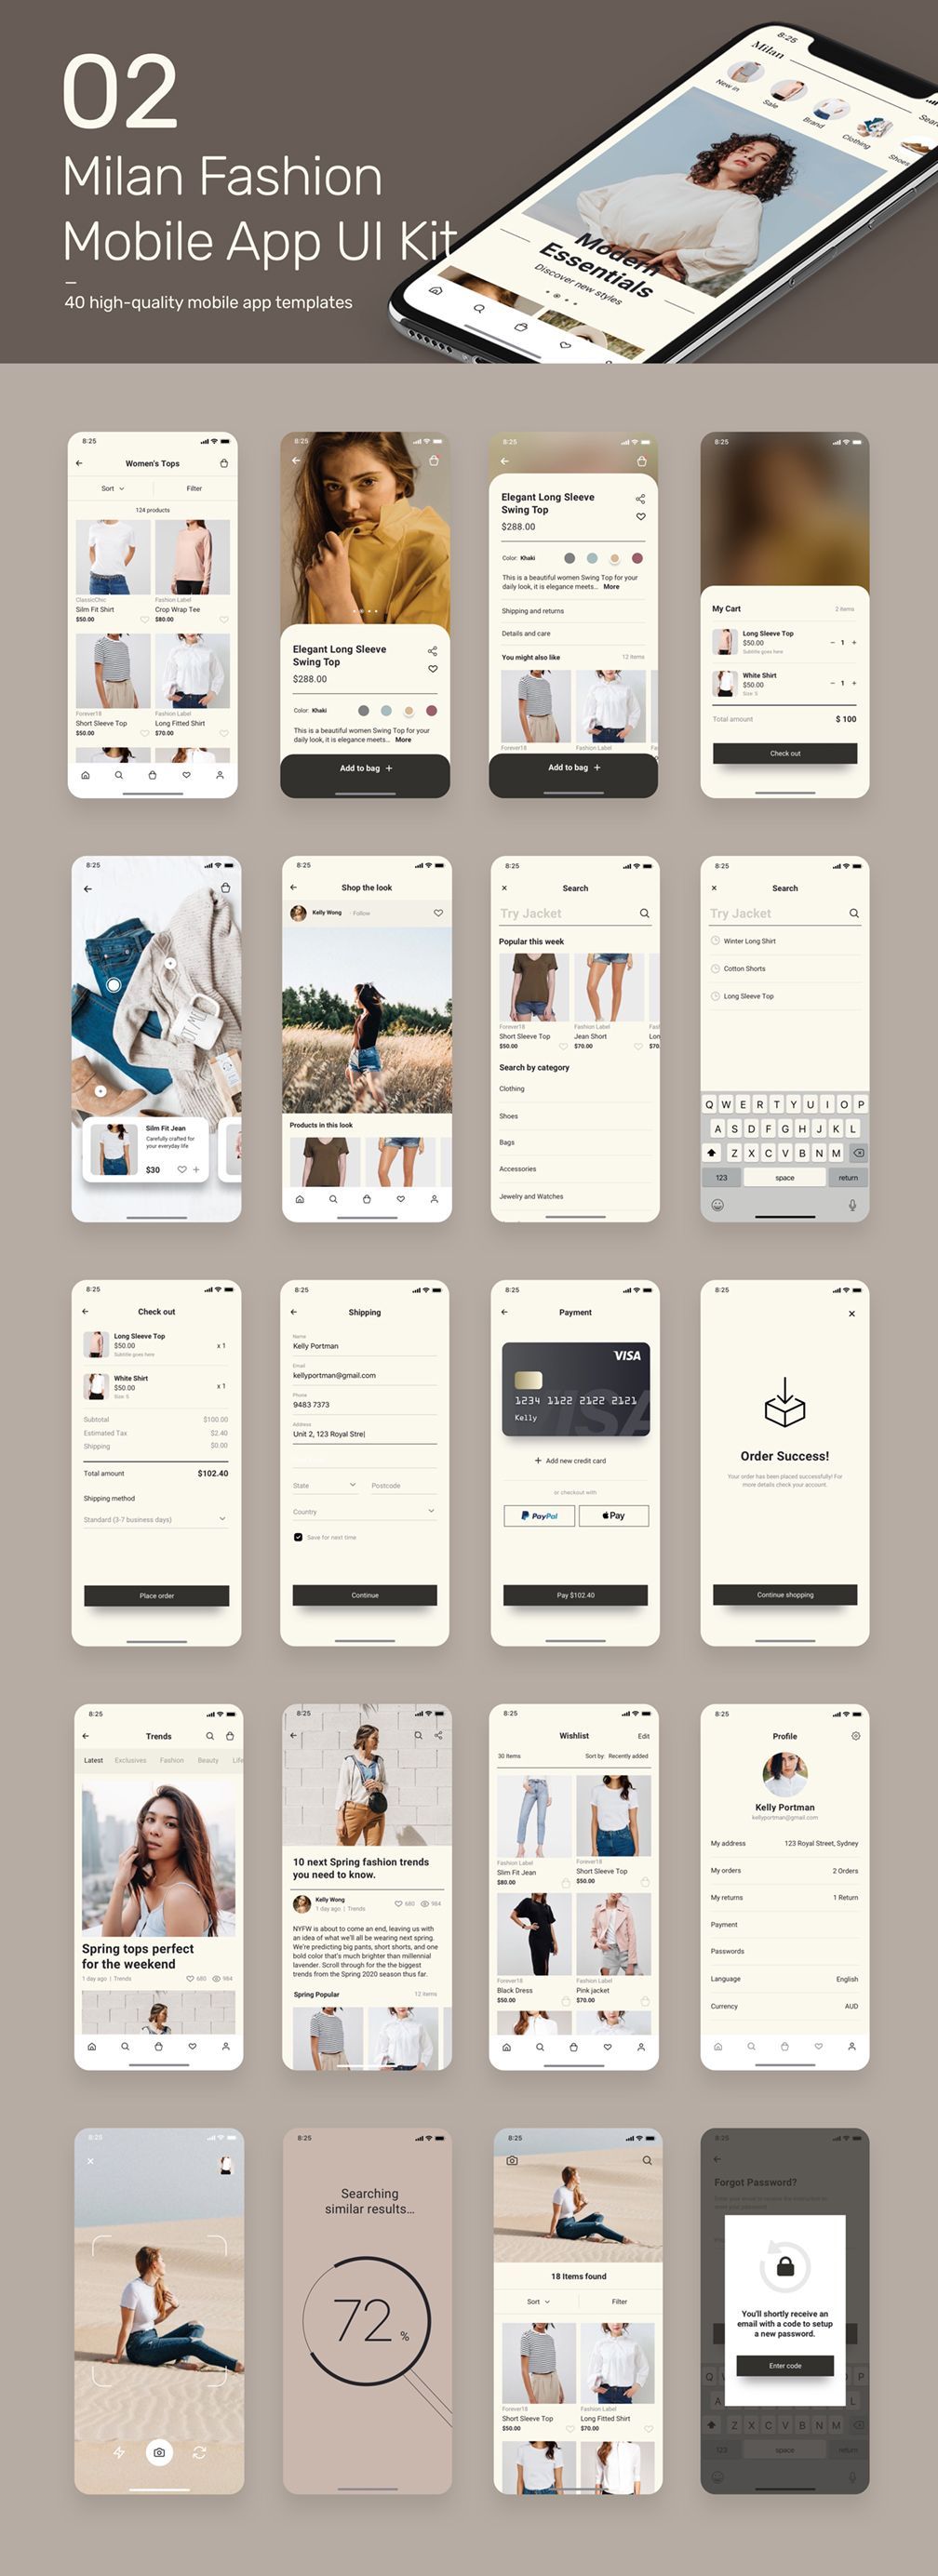 12 app style Guides ideas